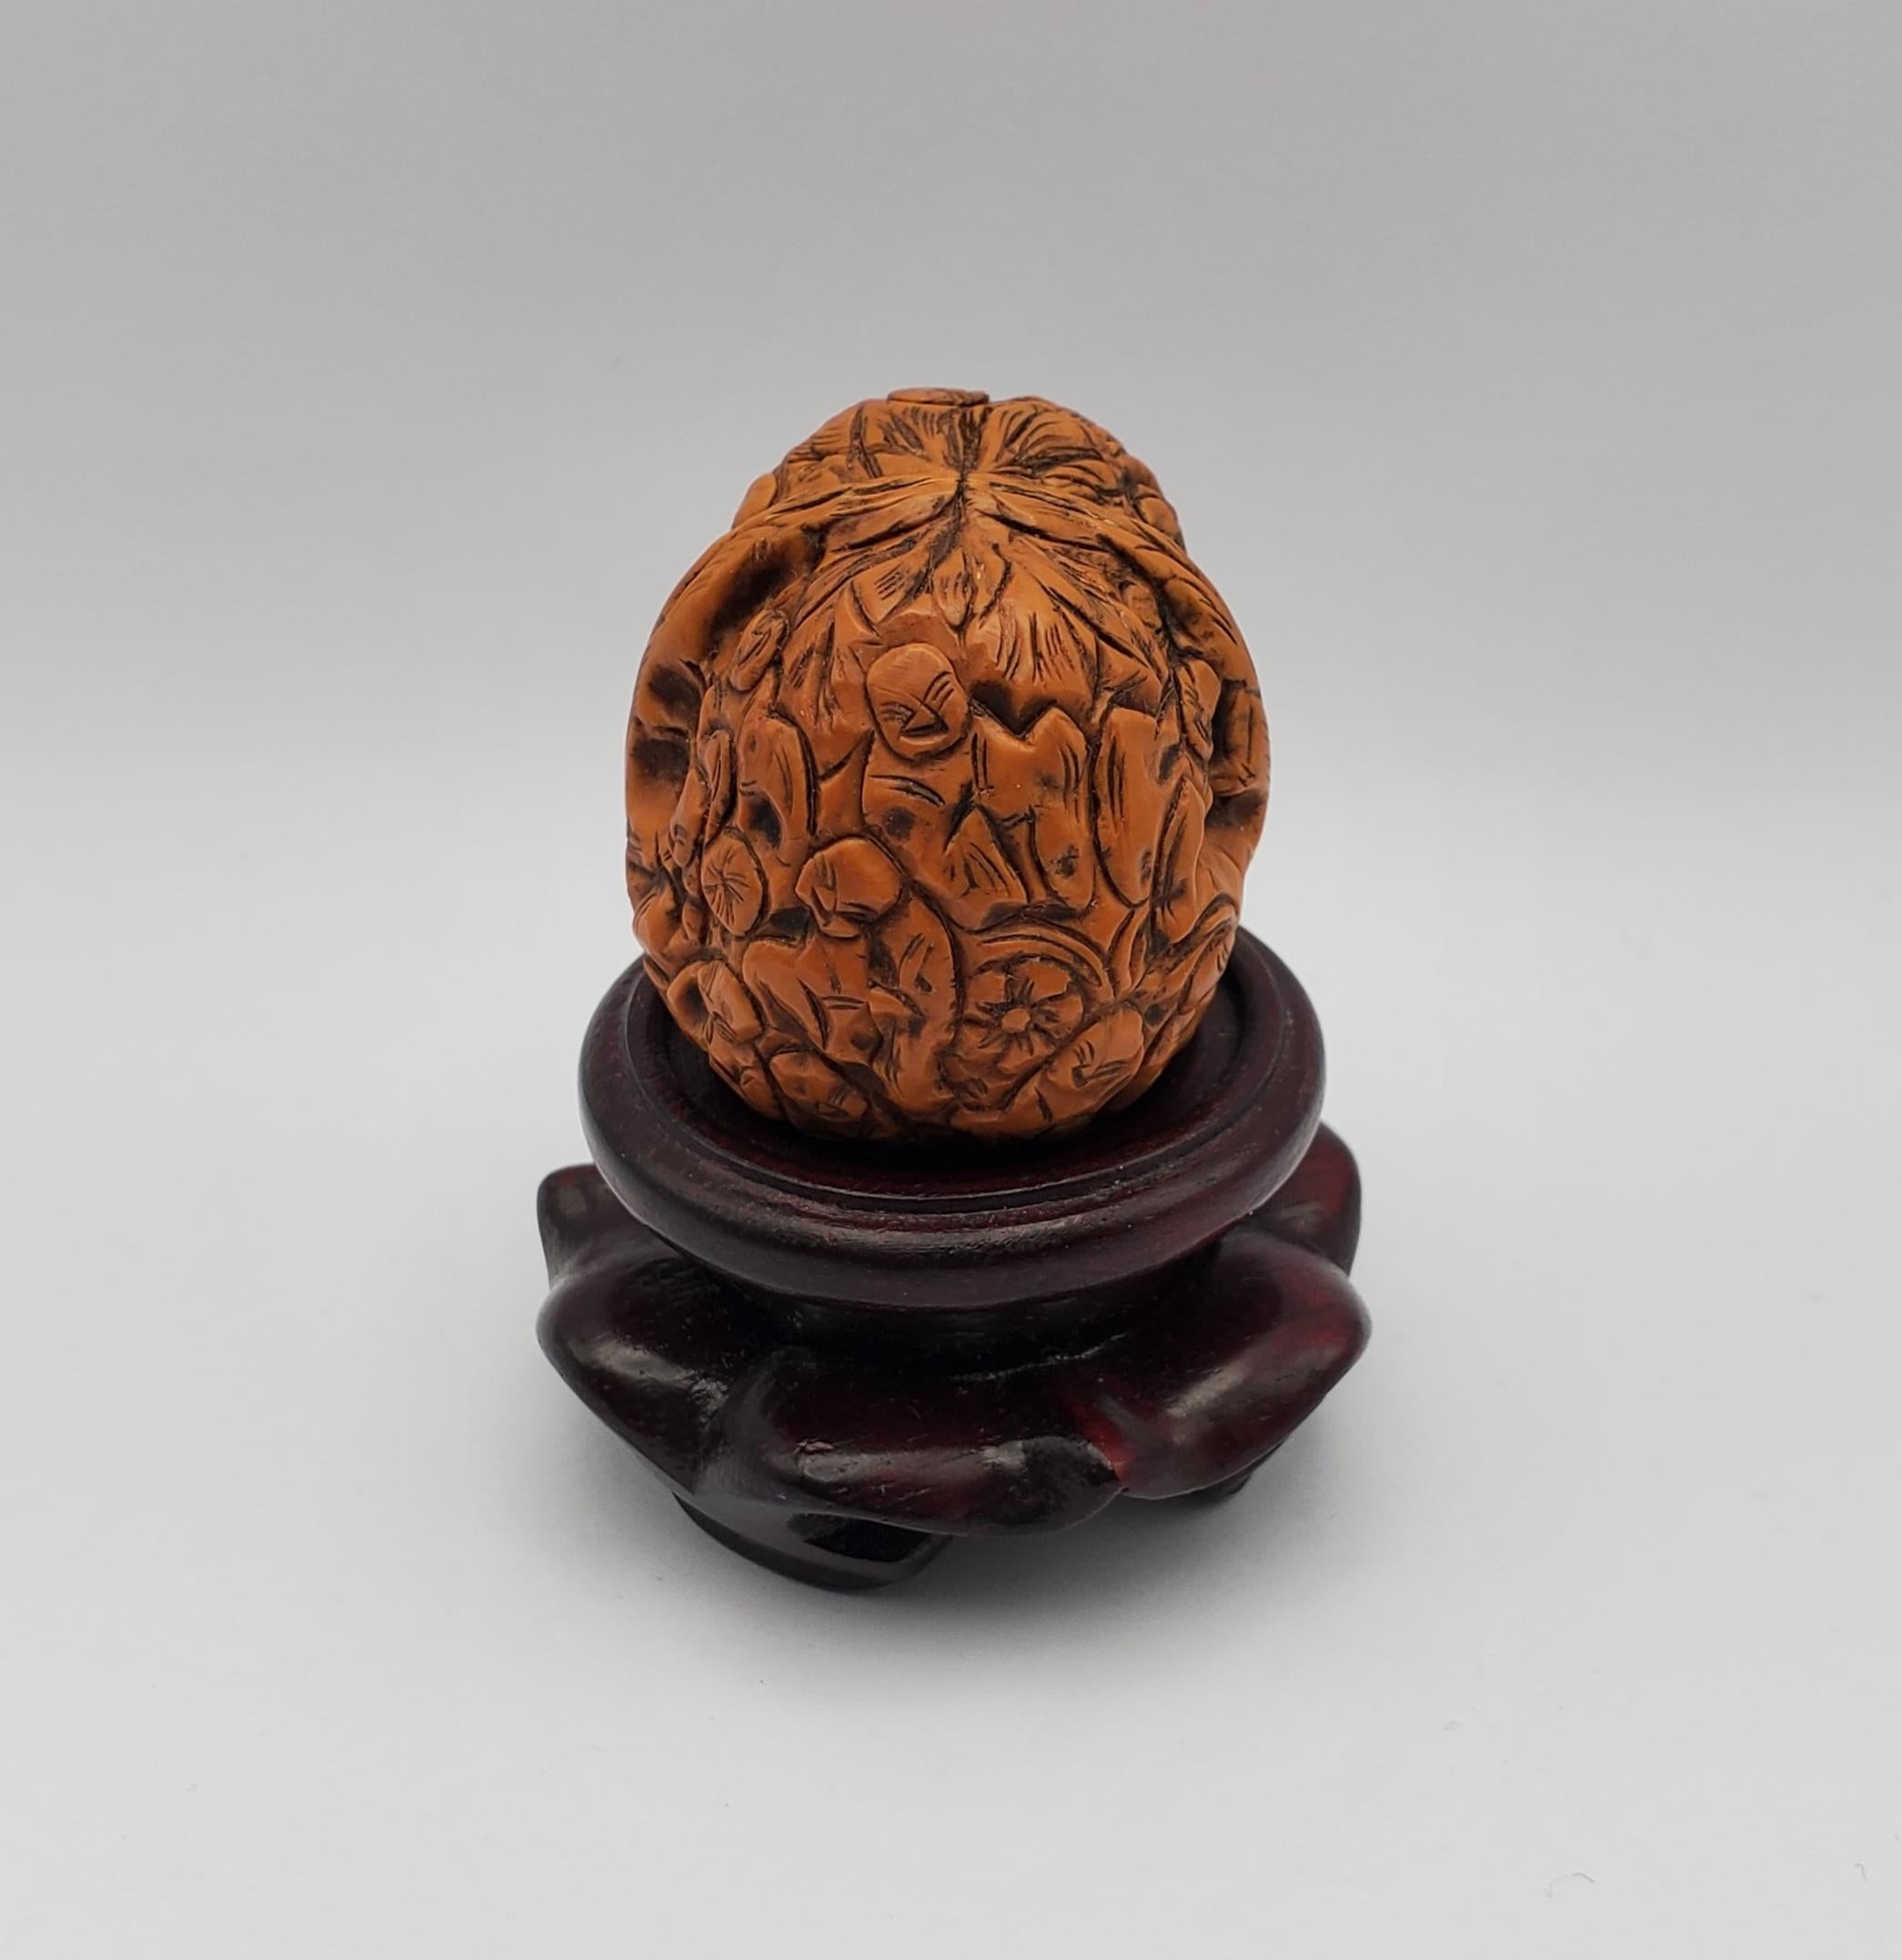 Beautiful hand carved Netsuke walnut sculpture depicting the 1000 faces motif with a carved wooden pedestal stand. The faces carved into the delicate shell represent Buddhist monks. There are some natural indentions in the walnut exterior but no